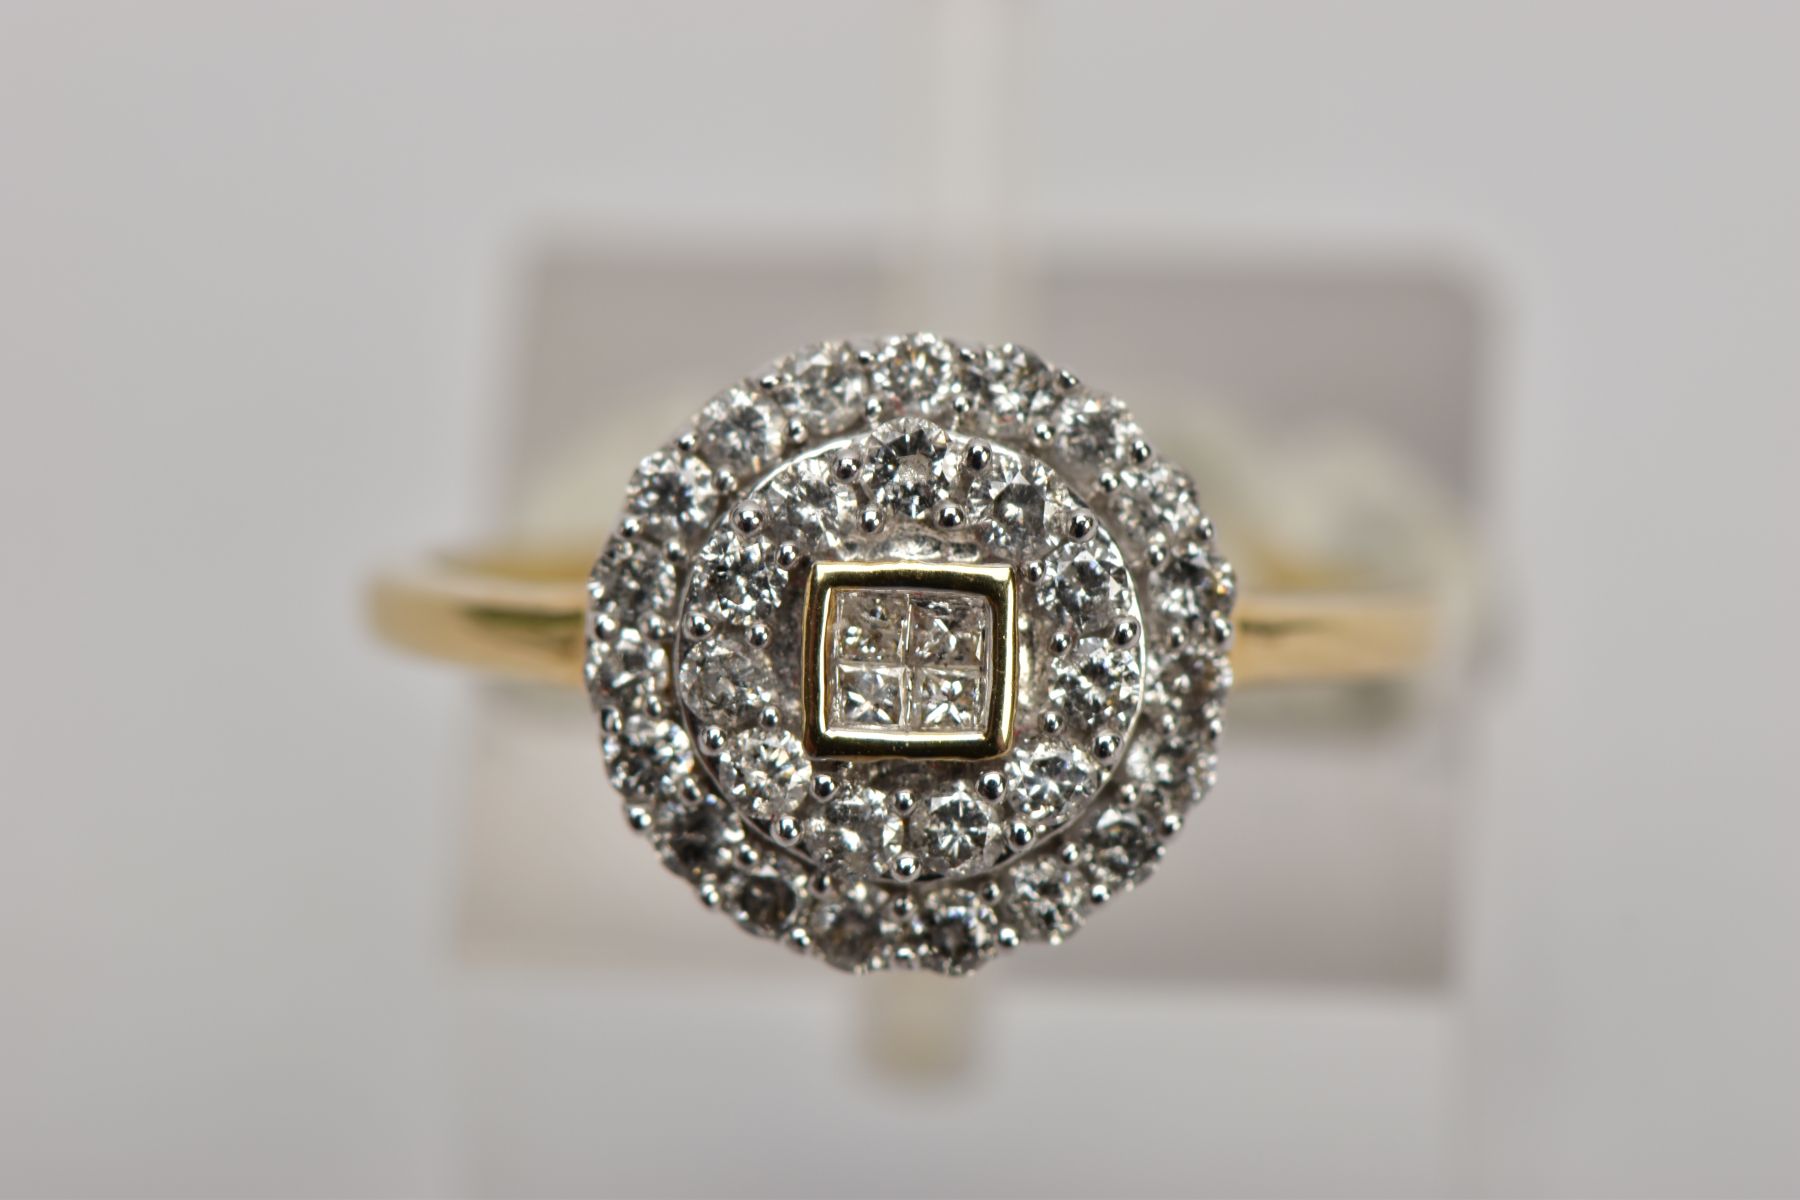 A 9CT GOLD DIAMOND CLUSTER RING, of a circular design, the central part set with four princess cut - Image 4 of 5